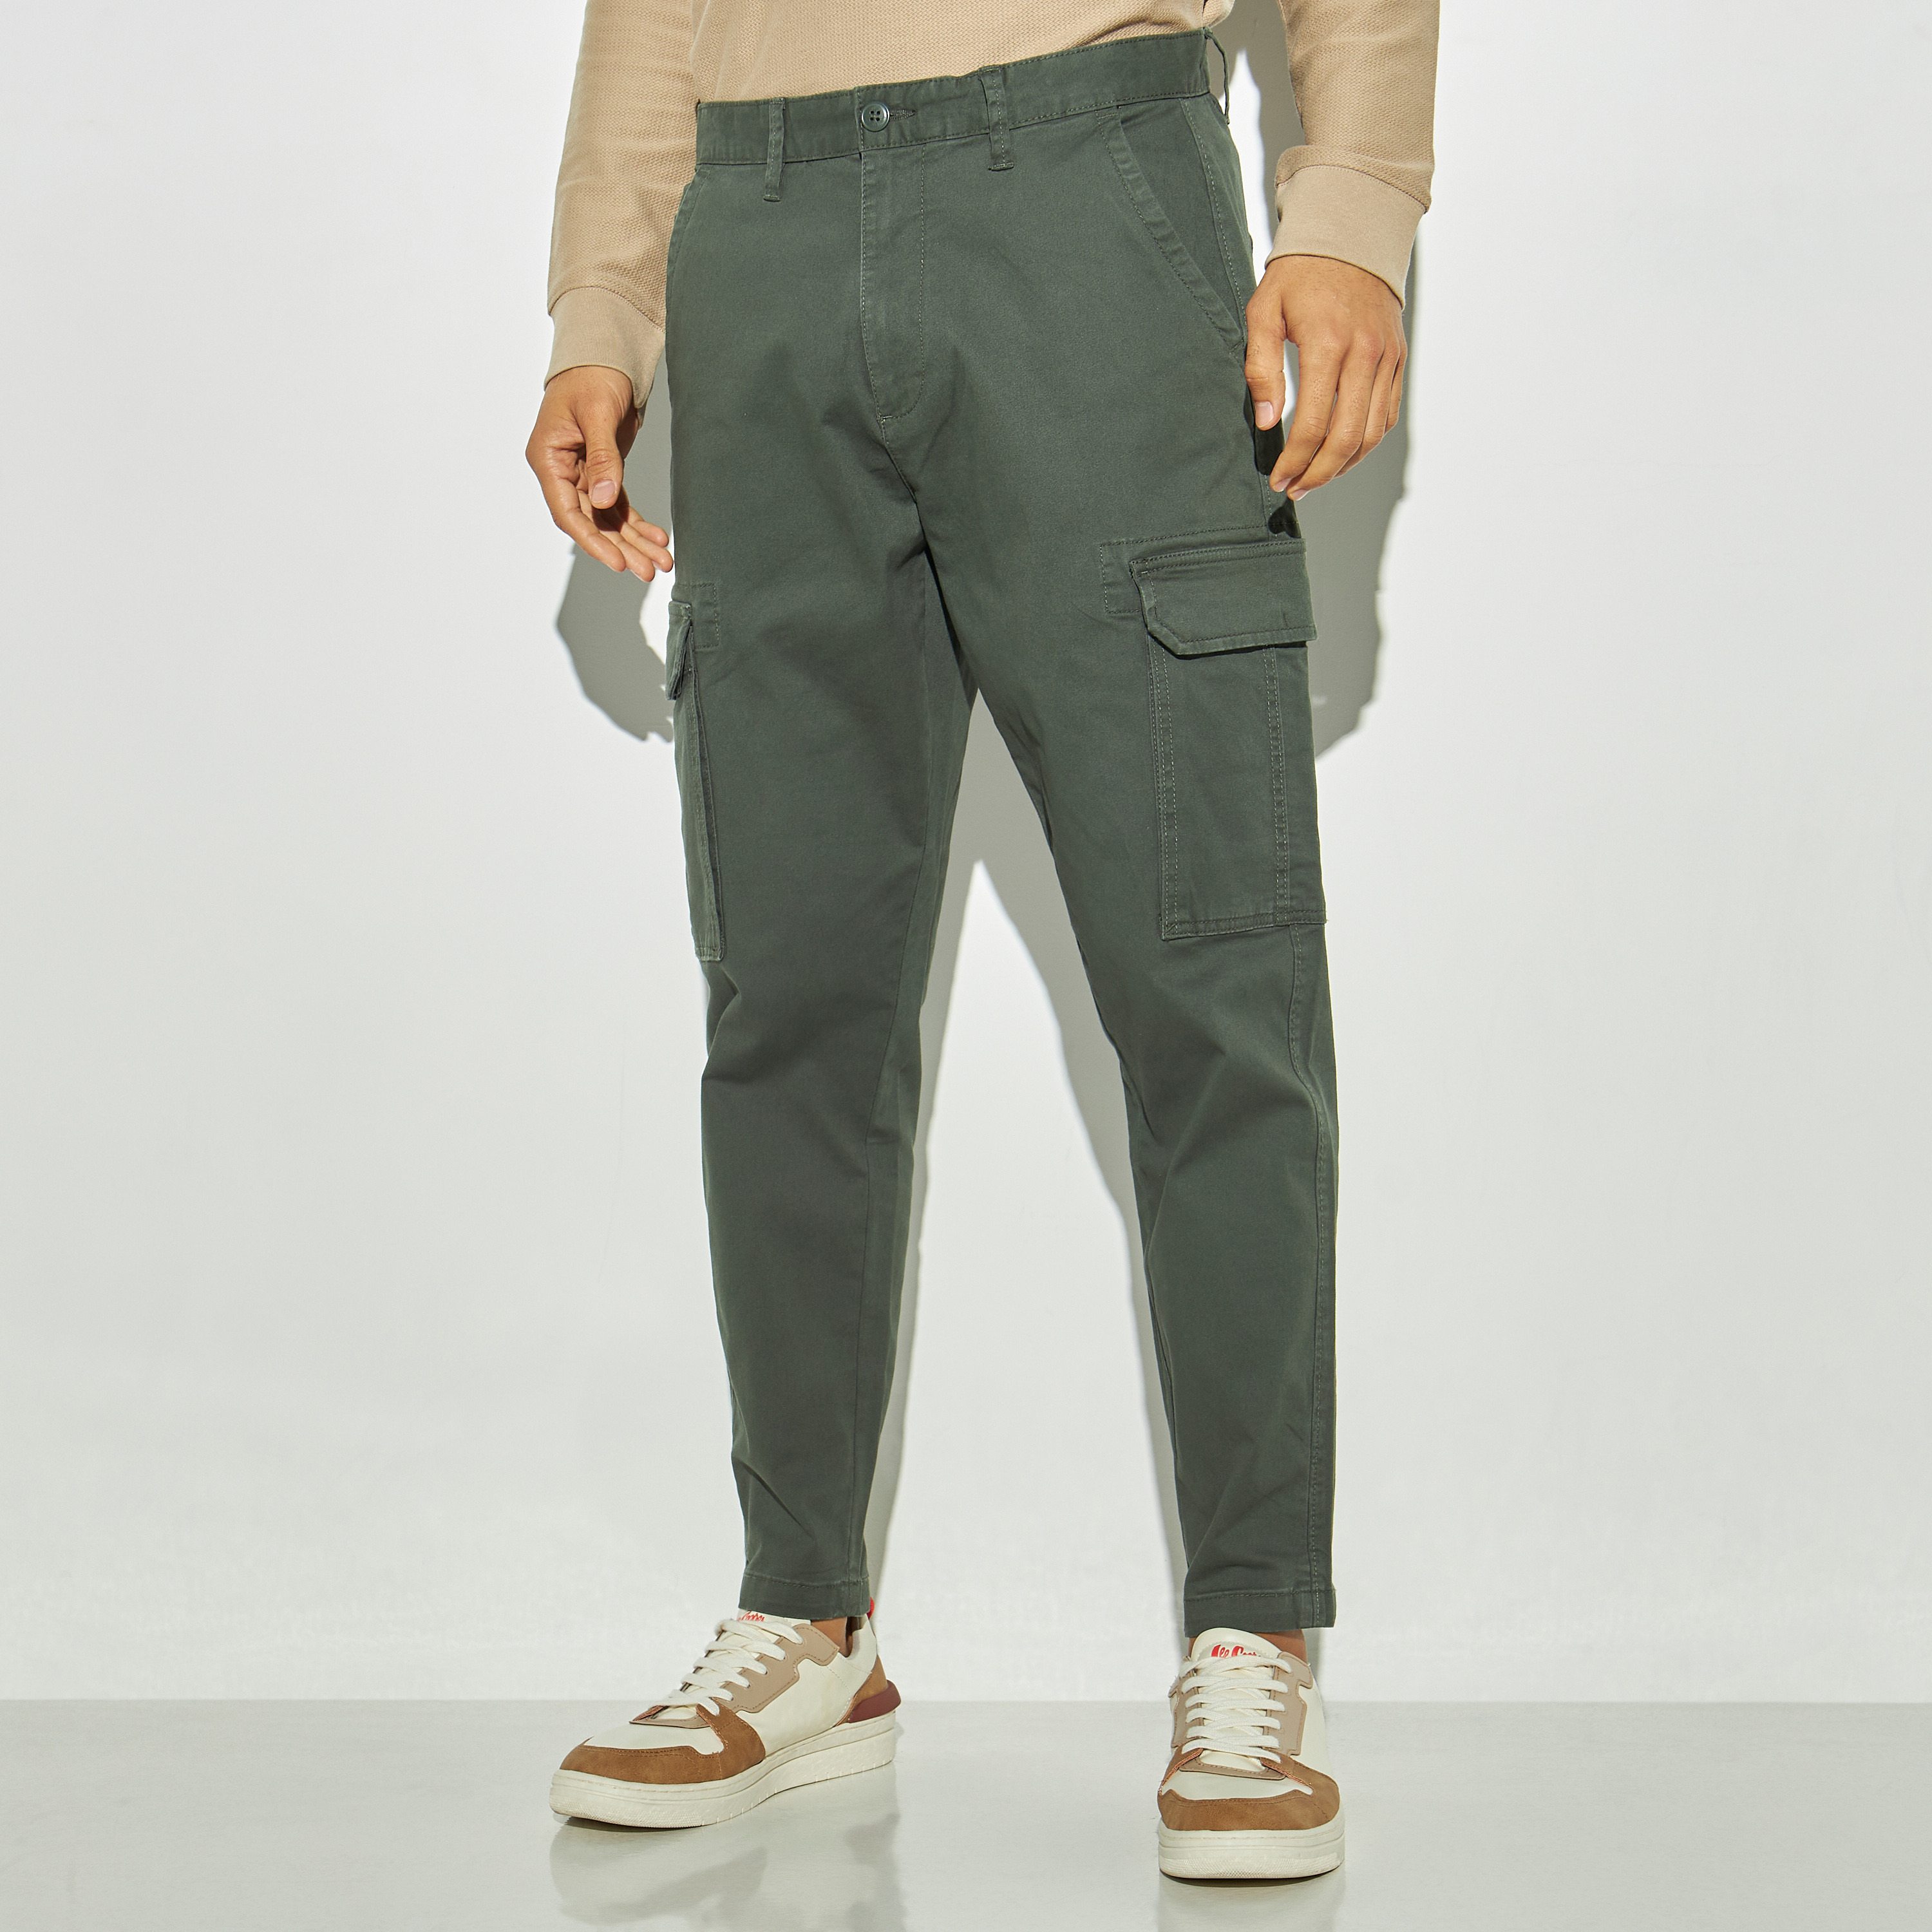 AKARMY Men's Casual Relaxed Fit Cargo Pants, India | Ubuy